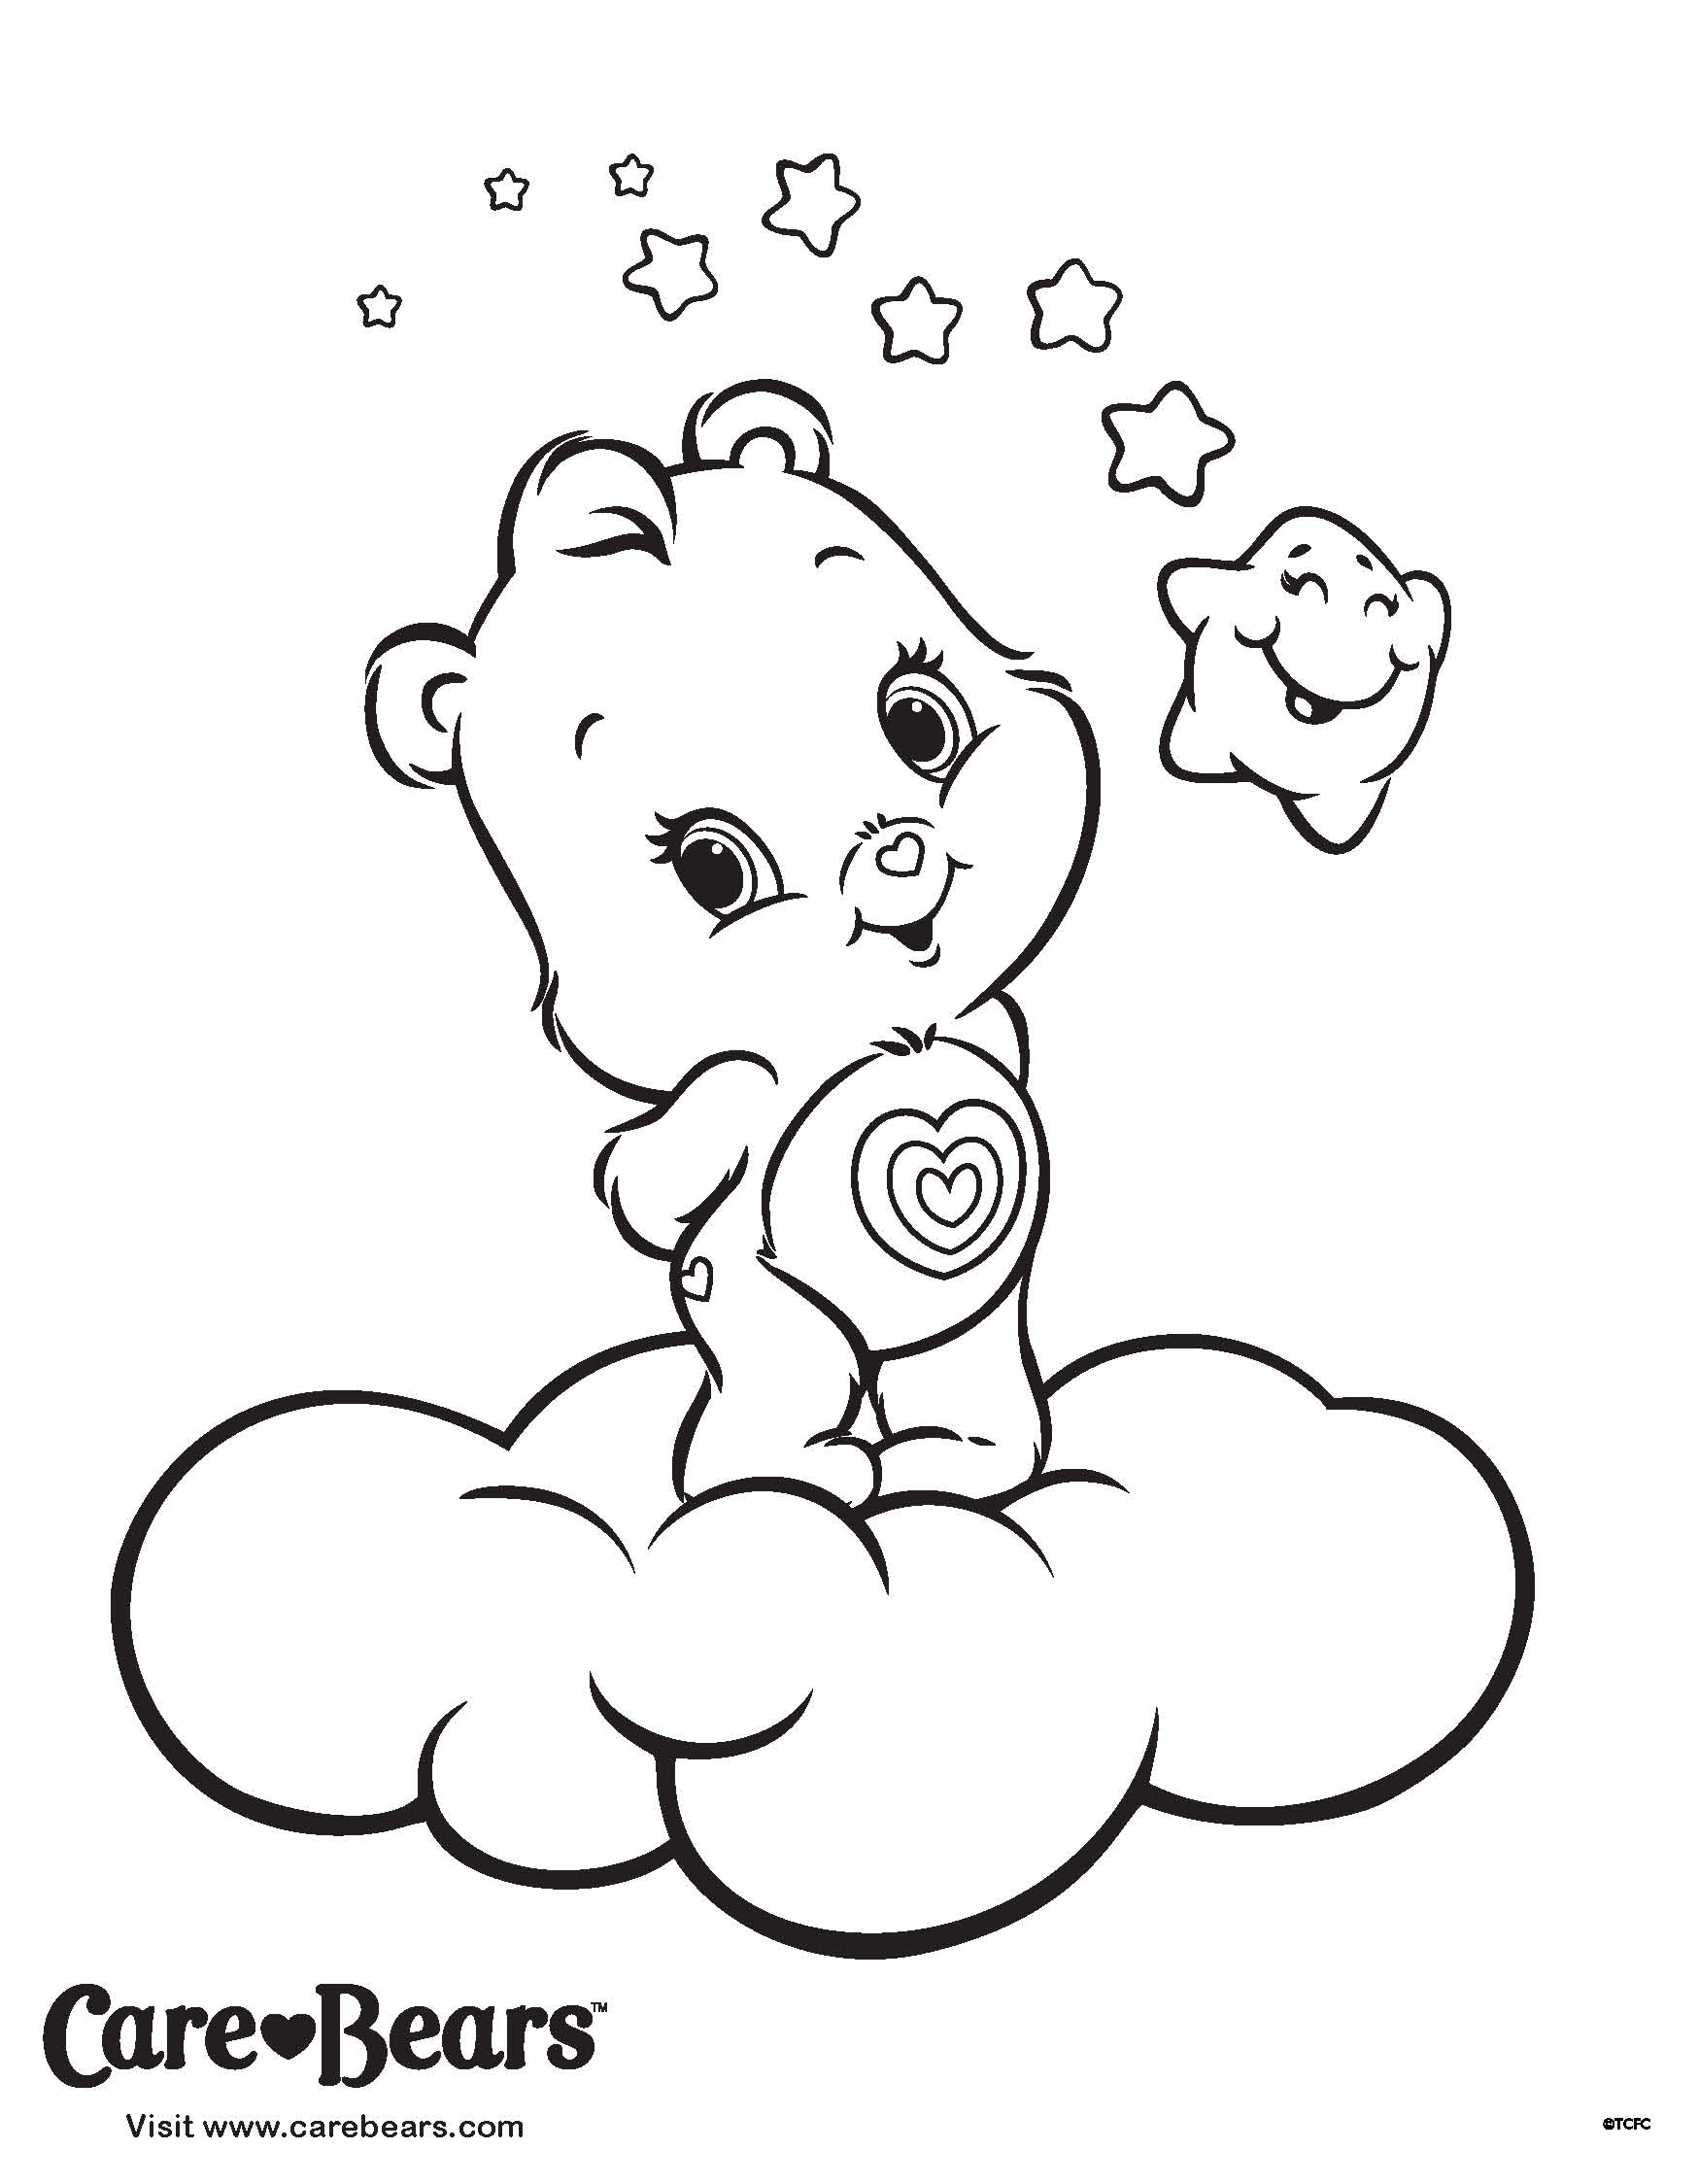 Care Bears Swimming Coloring Pages - Coloring Pages For All Ages